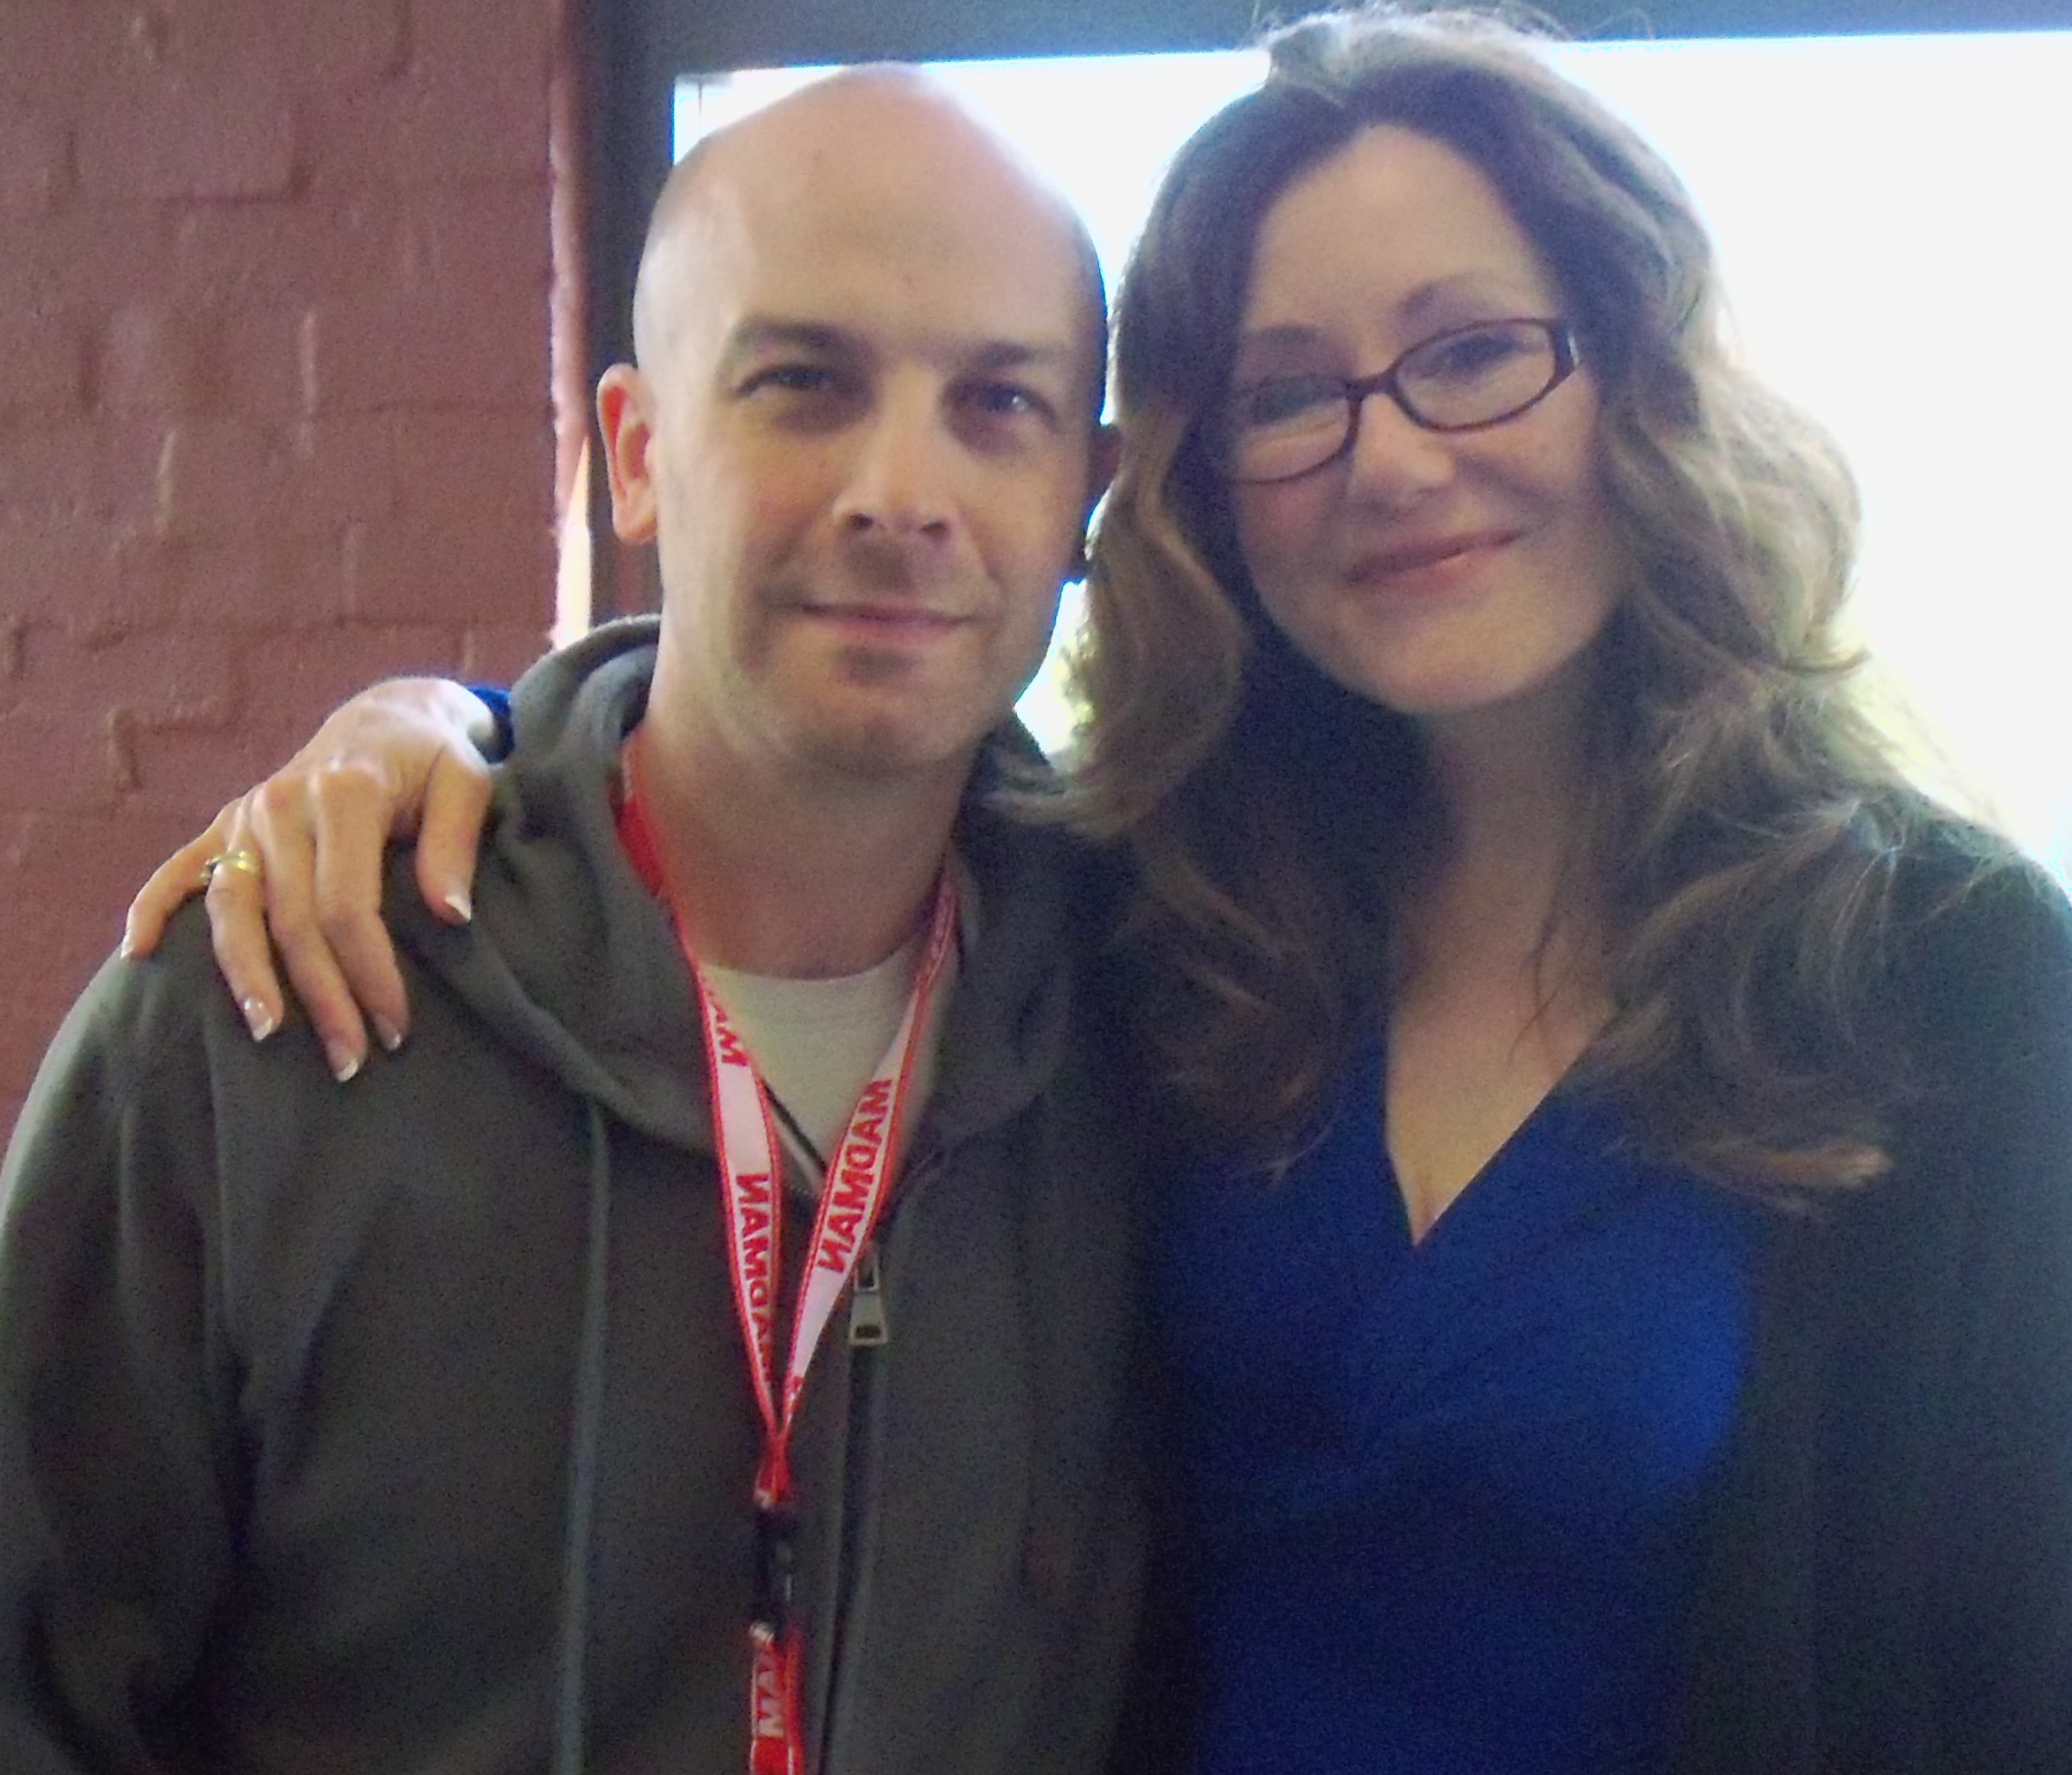 Mary McDonnell of Battlestar Galactica and Scott at the Melbourne Supanova convention.